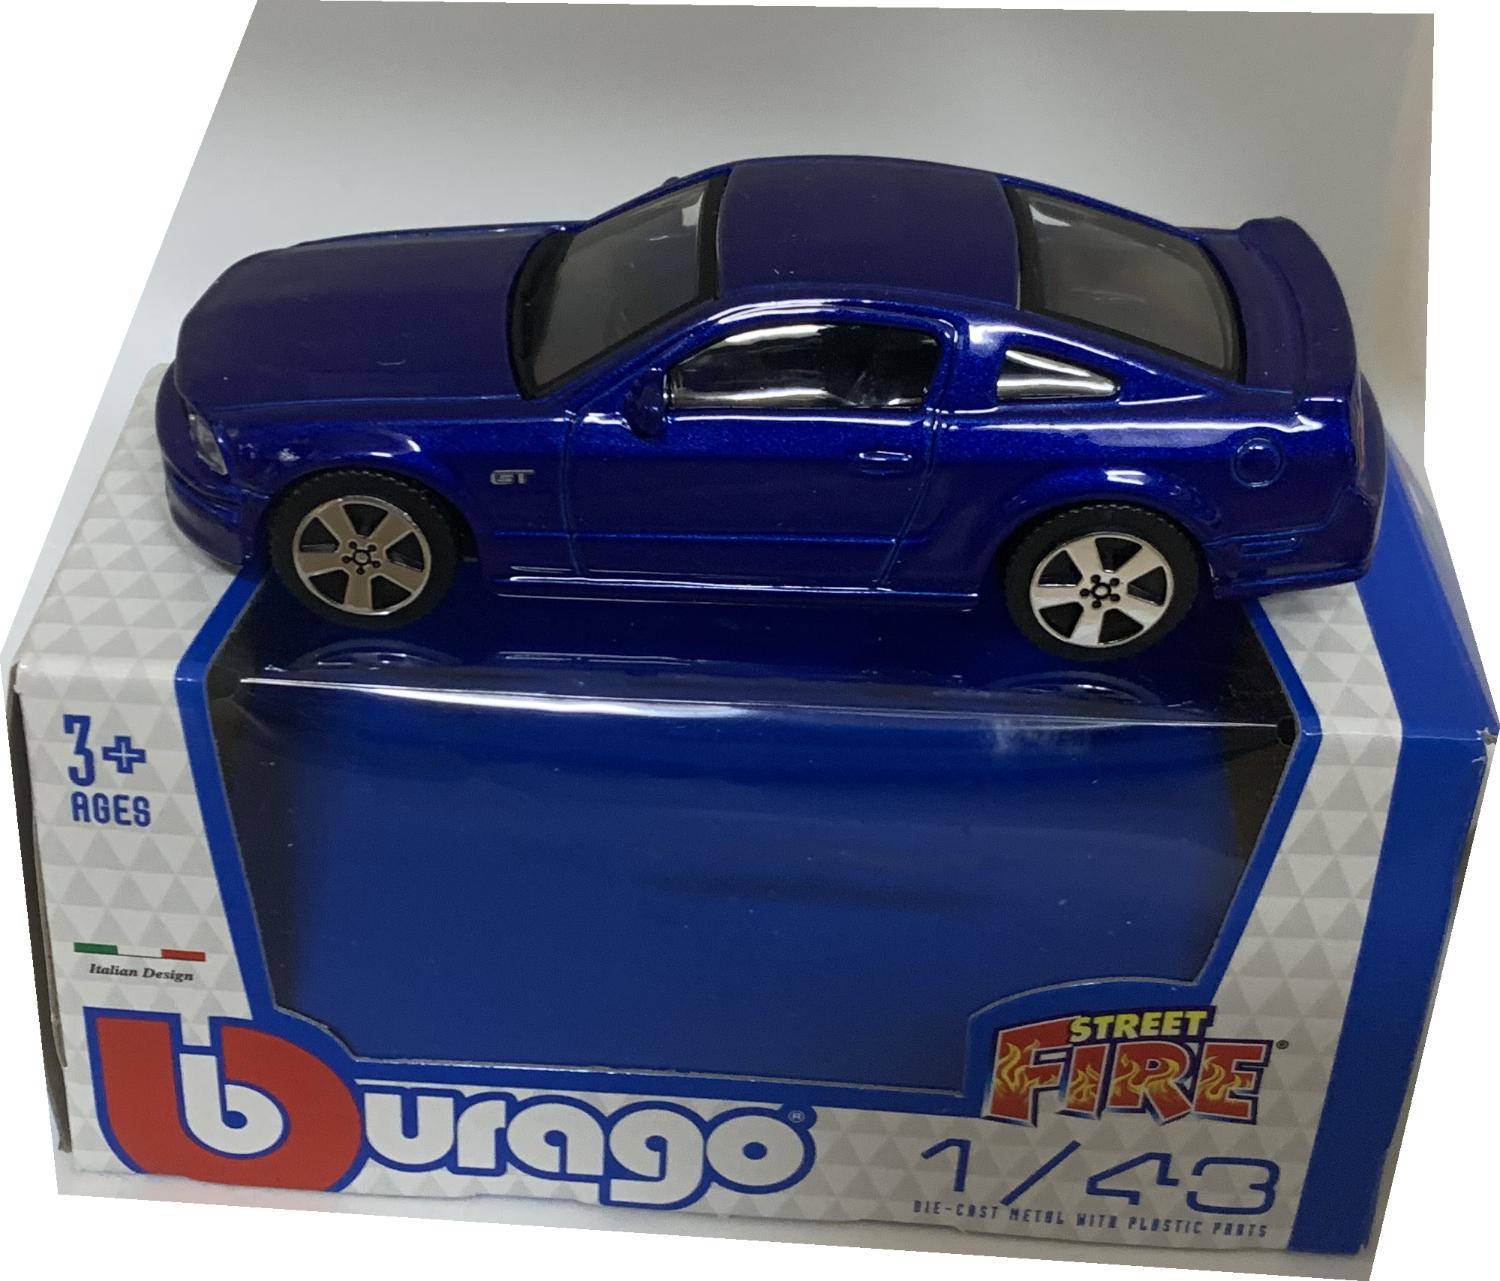 The Ford Mustang GT is decorated in blue with black interior.  Features working wheels, body coloured door handles, door mirrors and rear spoiler.  Model is presented in a window display box